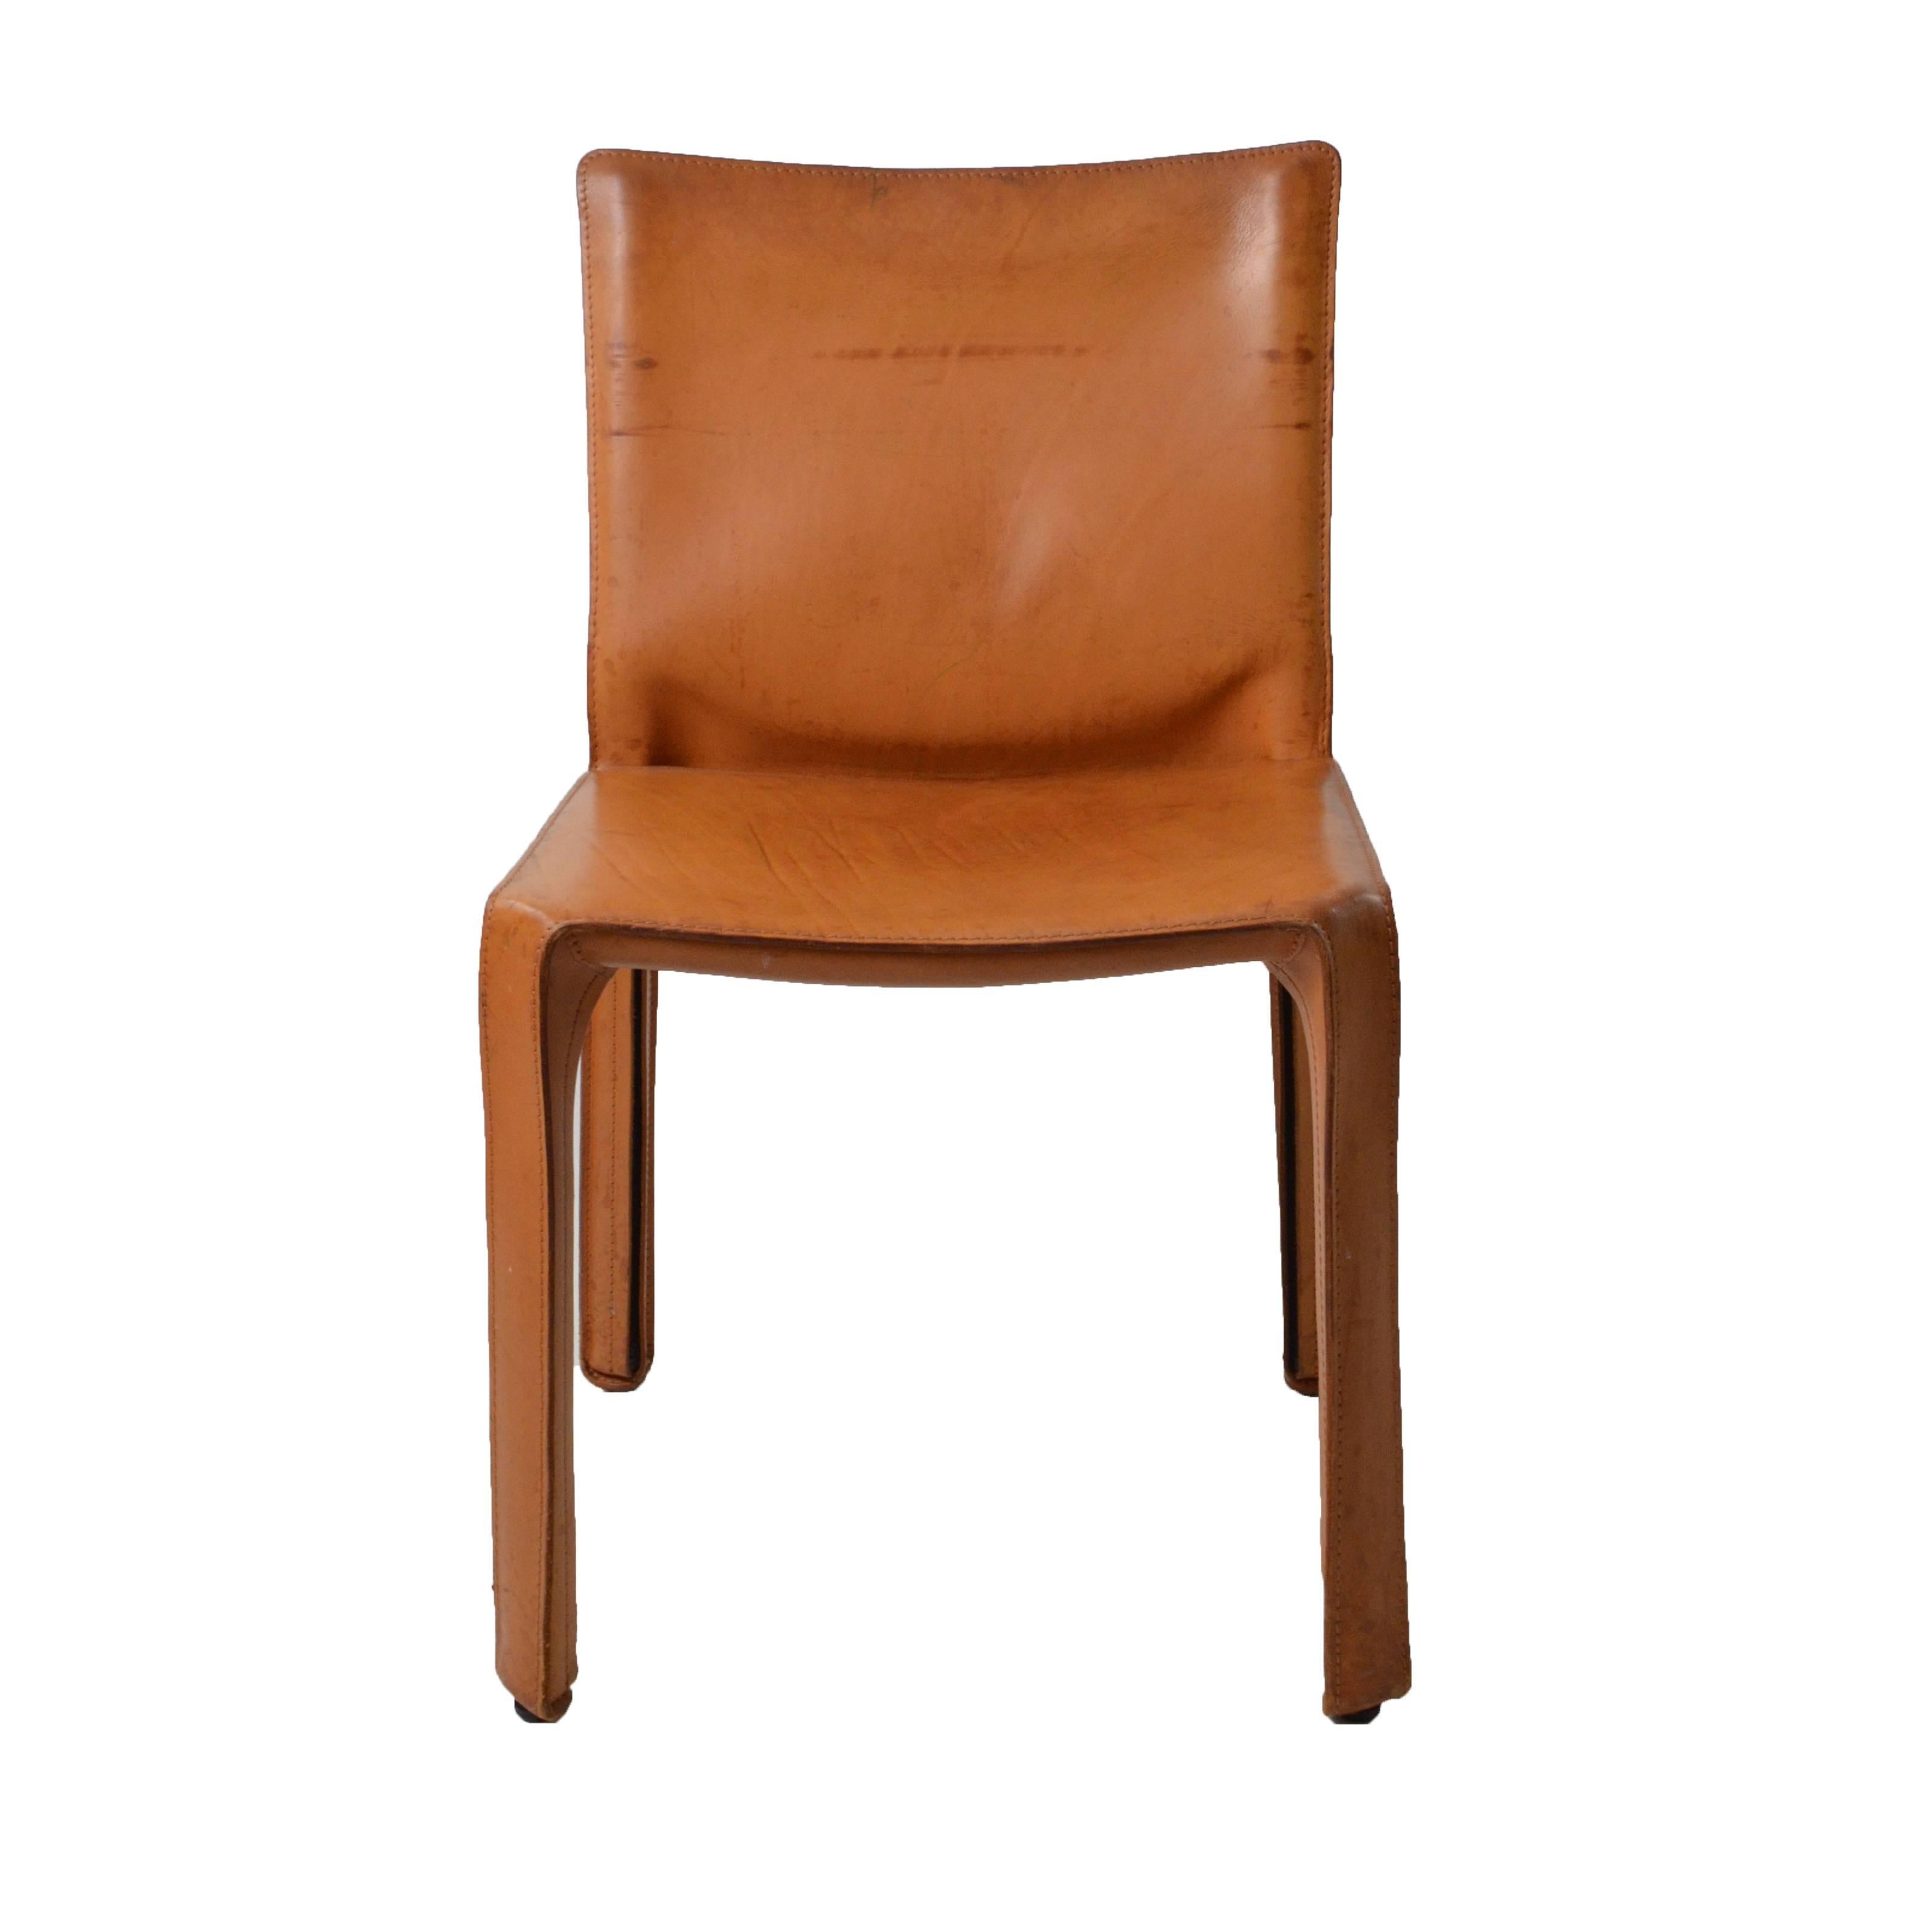 Eight original Cab chairs model. 412, marked Cassina constructed totally out of leather. Good conditions, minor signs coherent with age and prior use, original patina. A video is available upon request to enjoy the piece as you are in front of